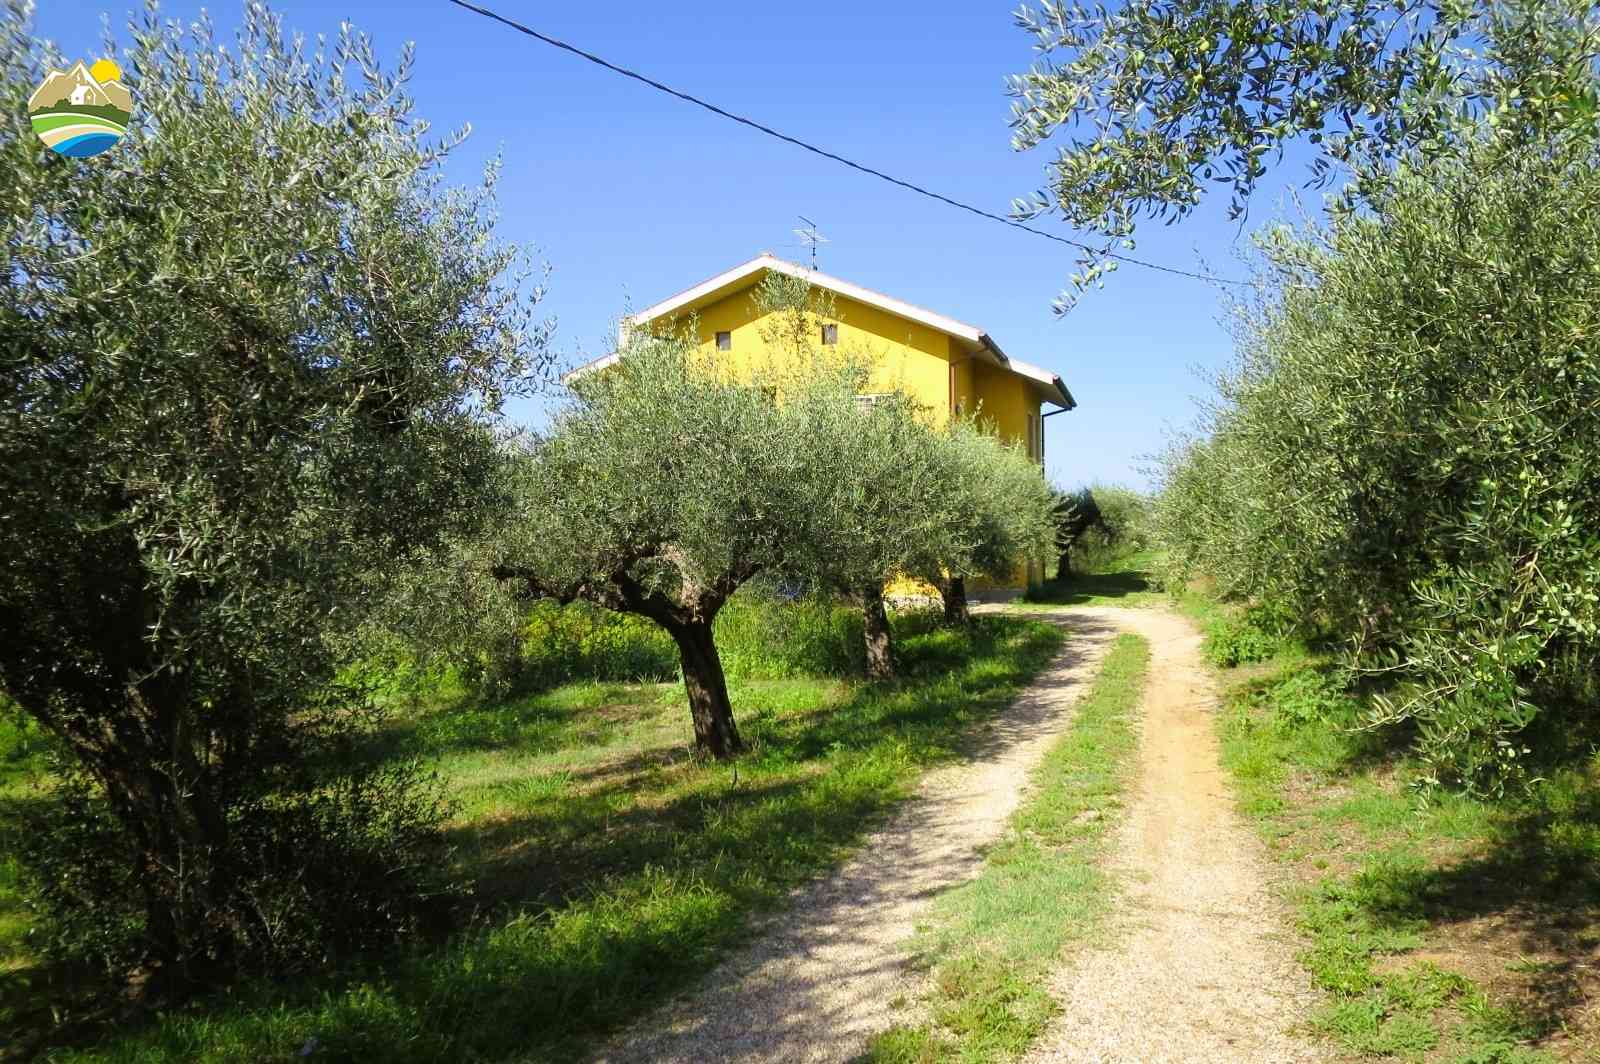 Country Houses Country Houses for sale Elice (PE), Casa del Sole - Elice - EUR 282.245 720